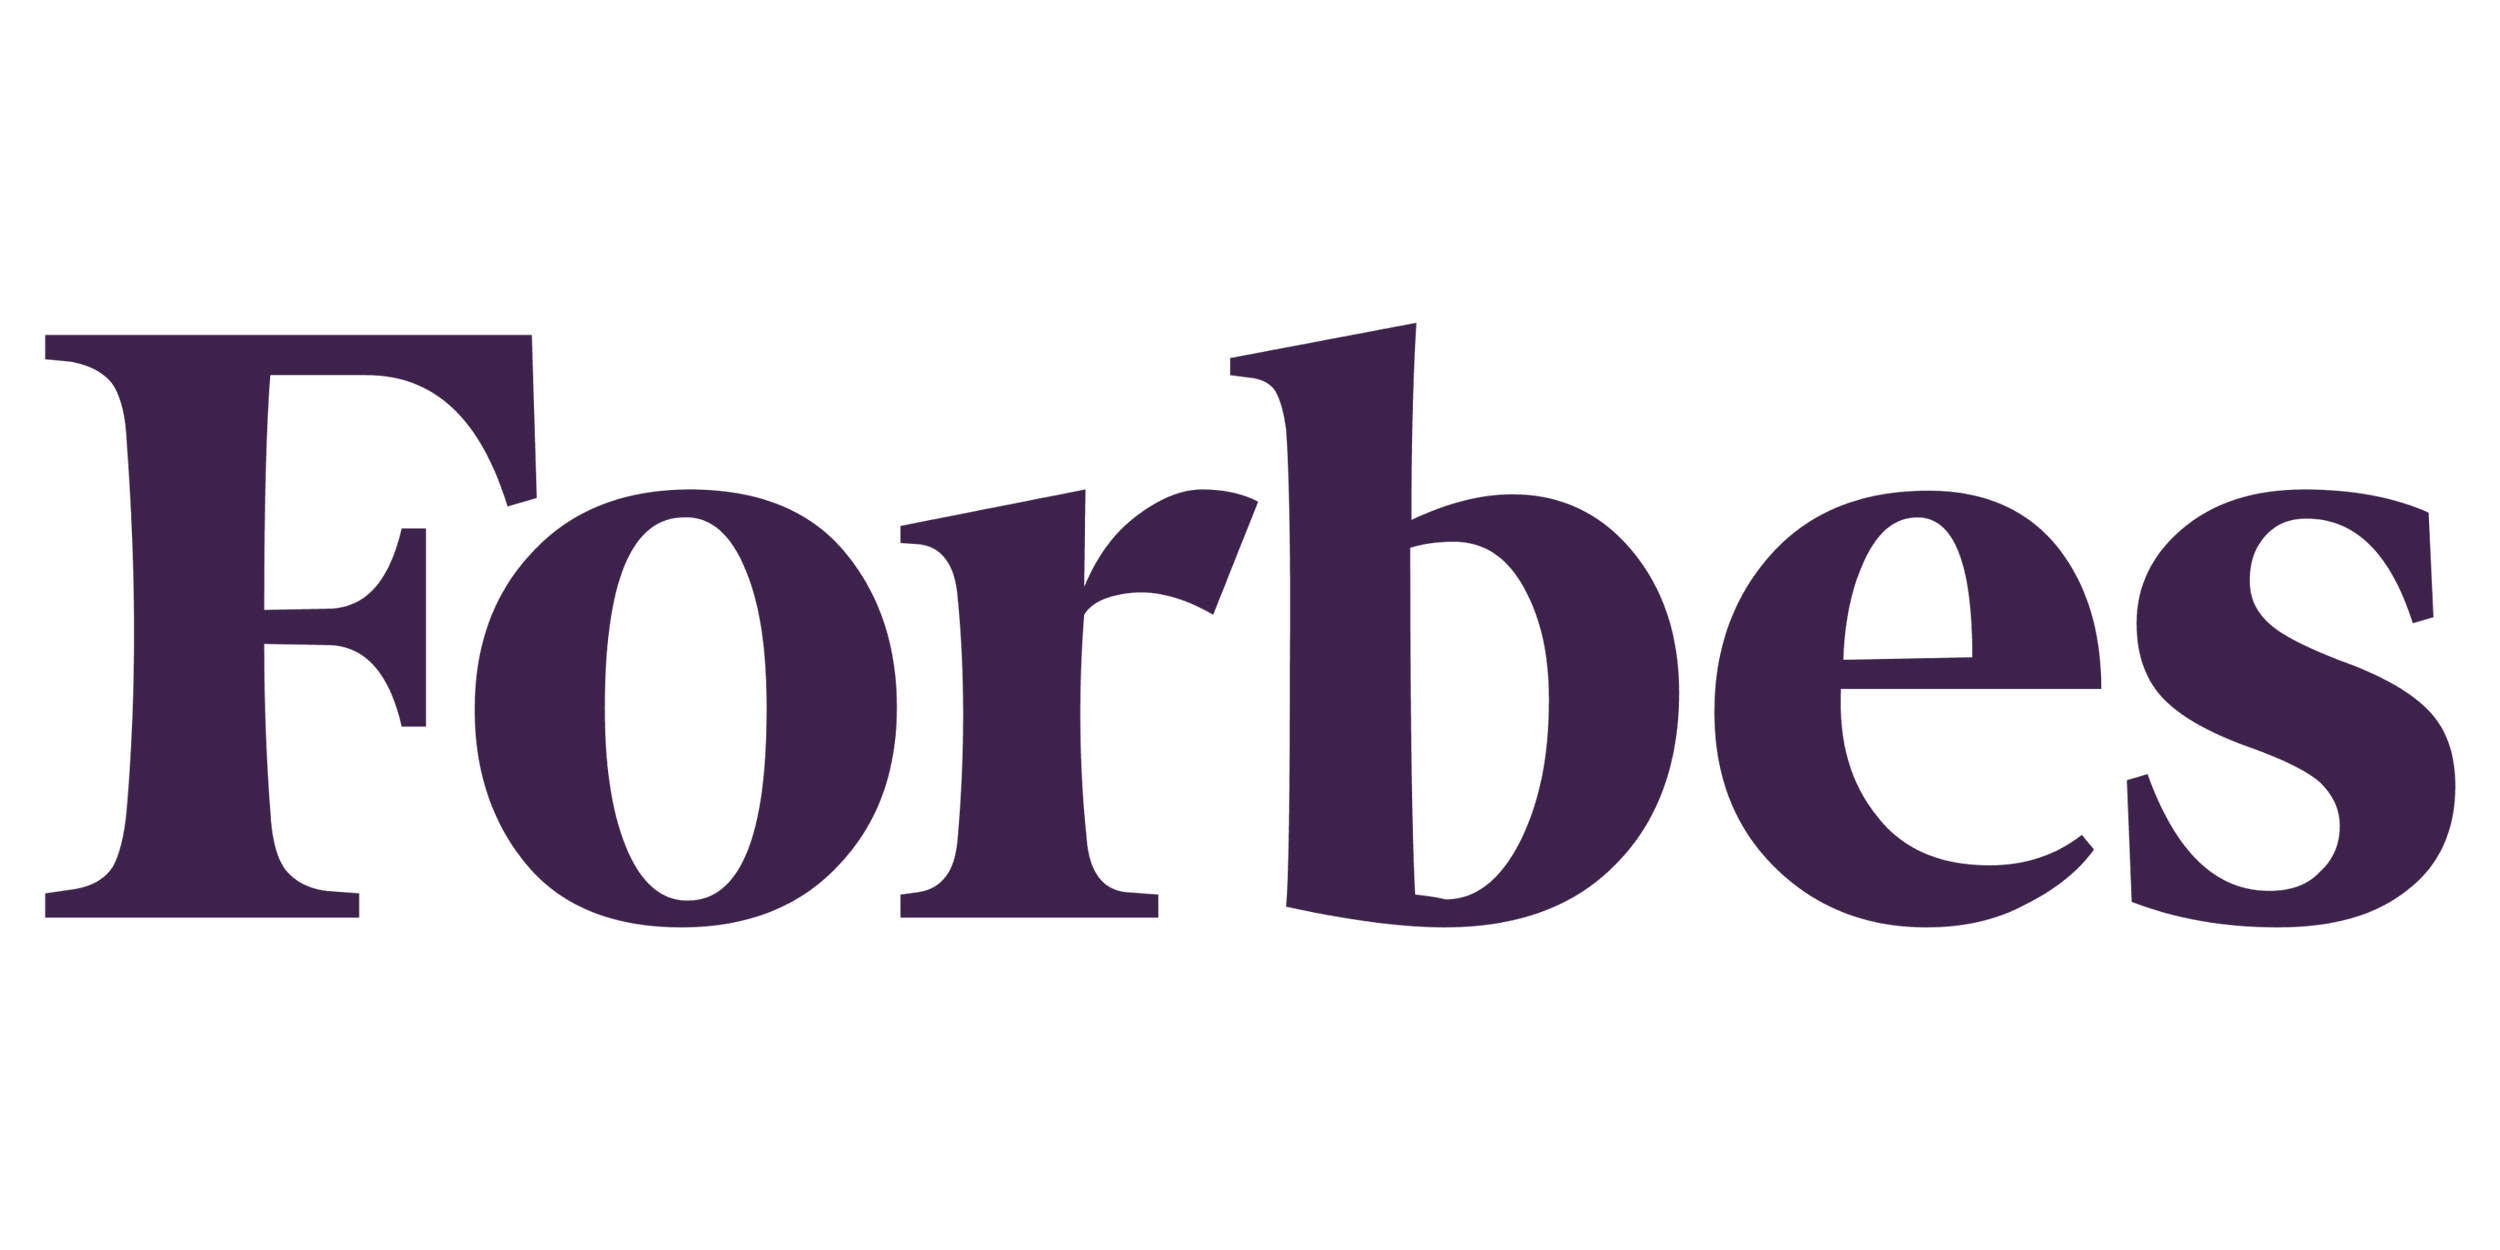 FORBES LOGO.png